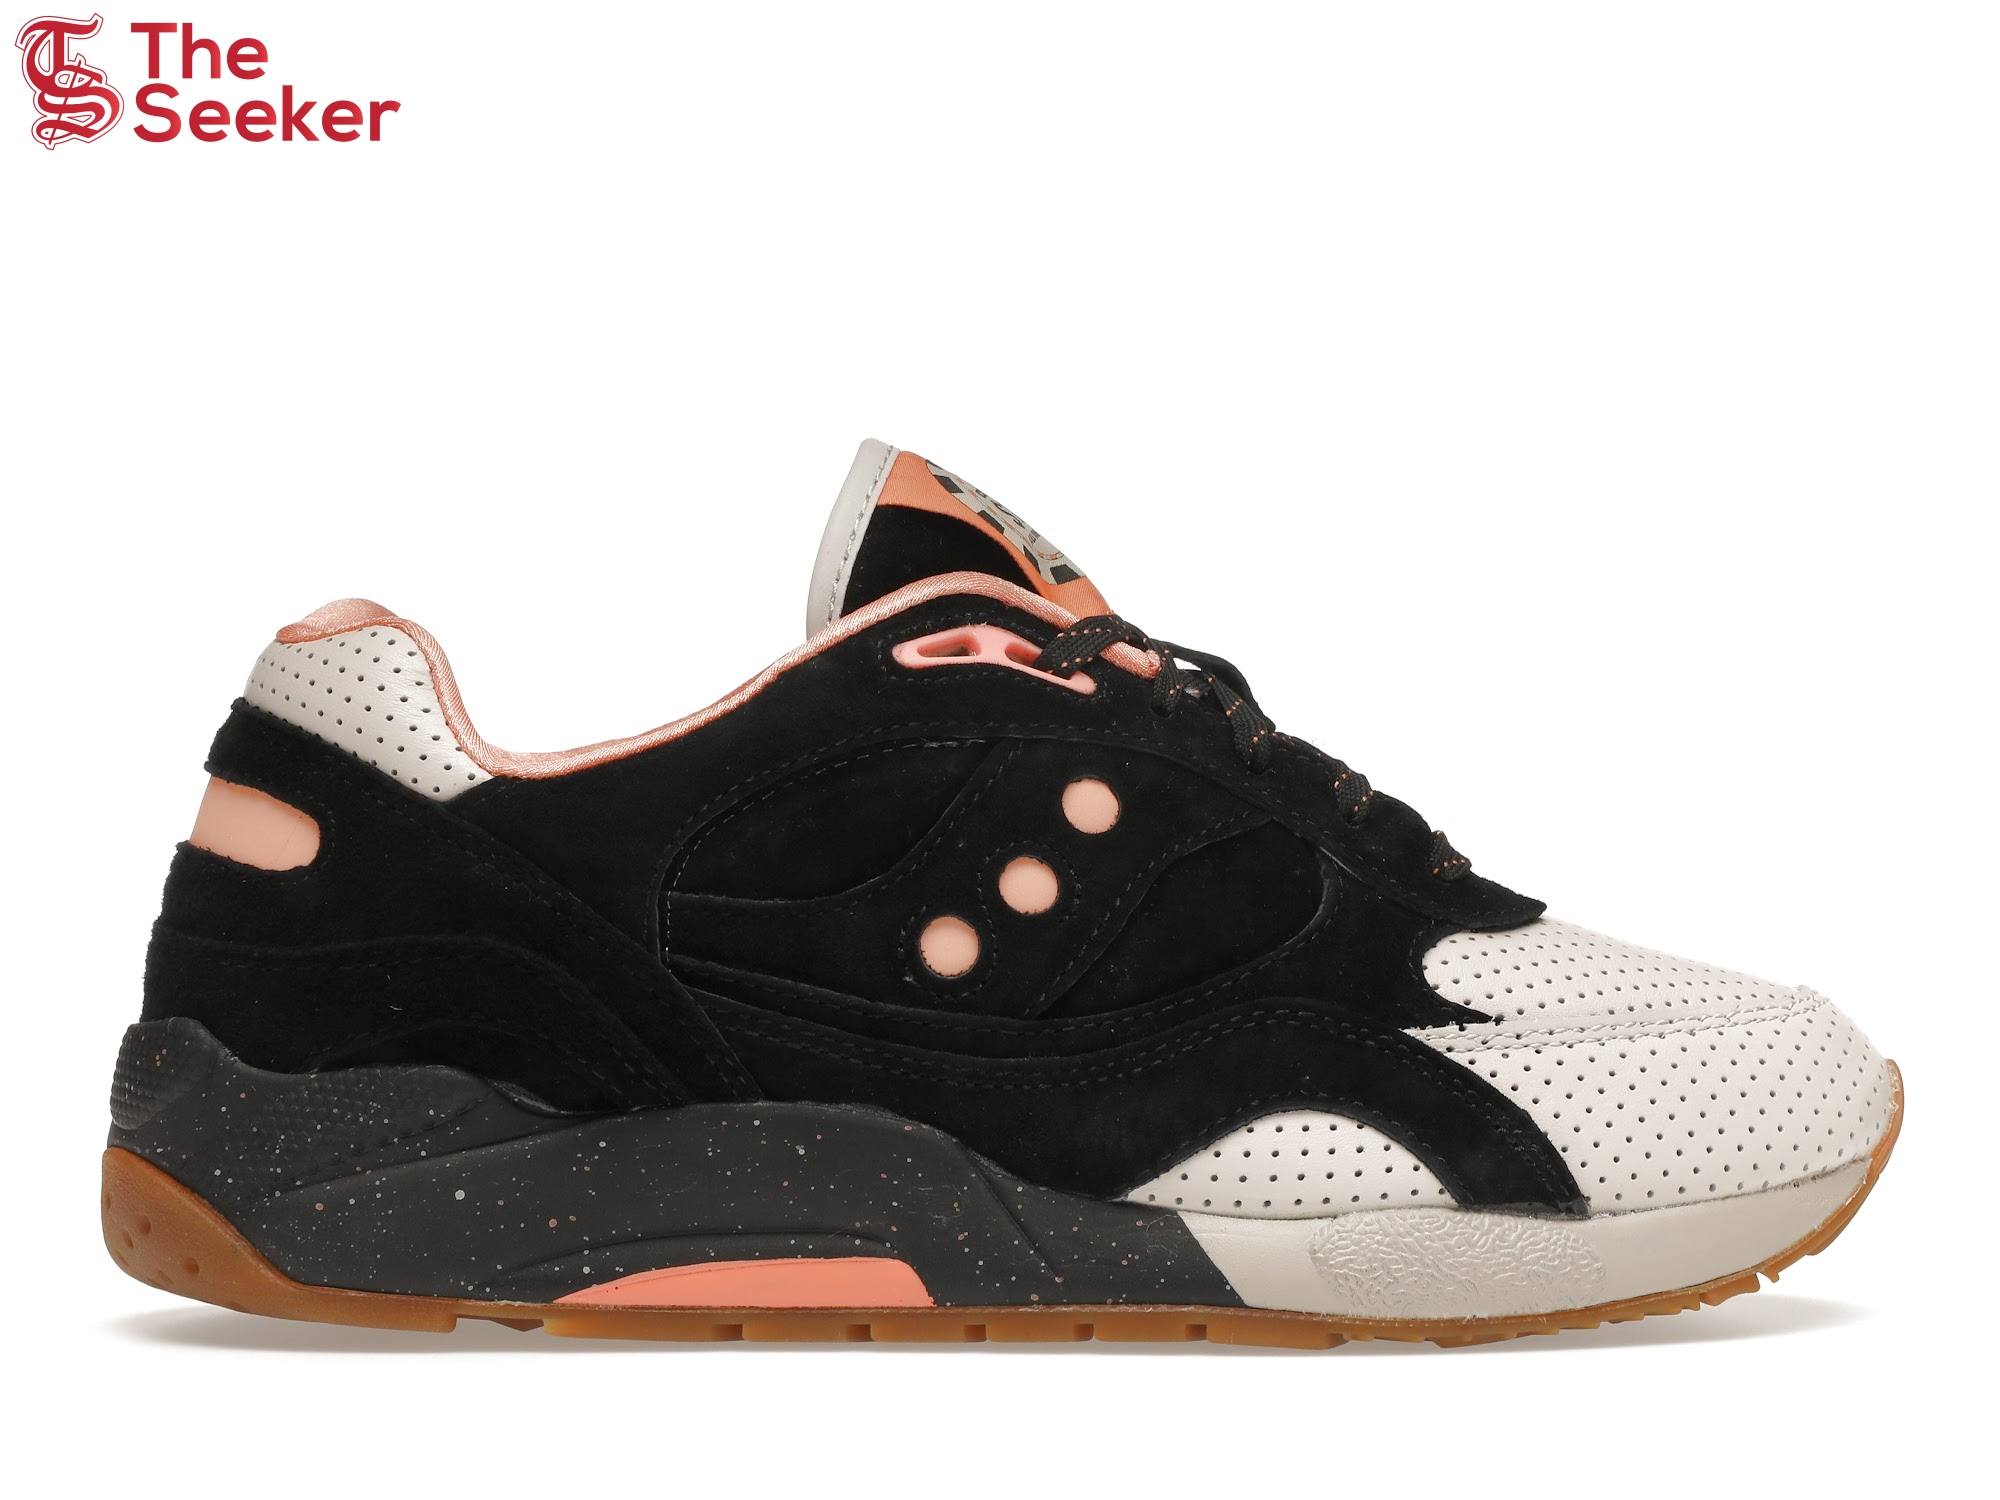 Saucony G9 Shadow 6 Feature High Roller